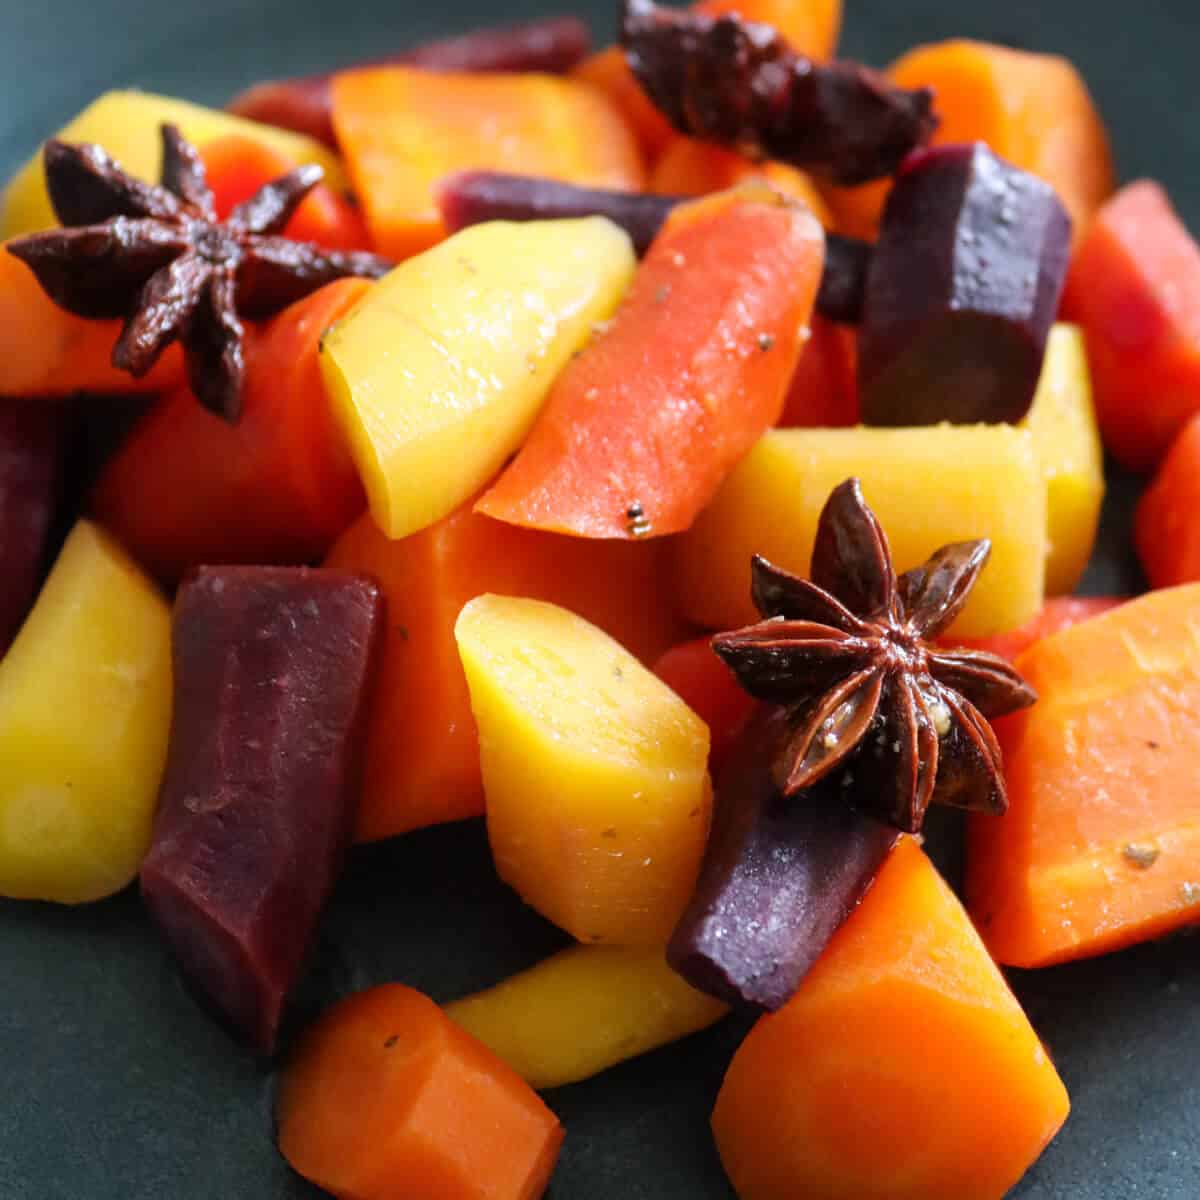 Rainbow Carrots cooked en papillote with star anise, in a serving bowl.